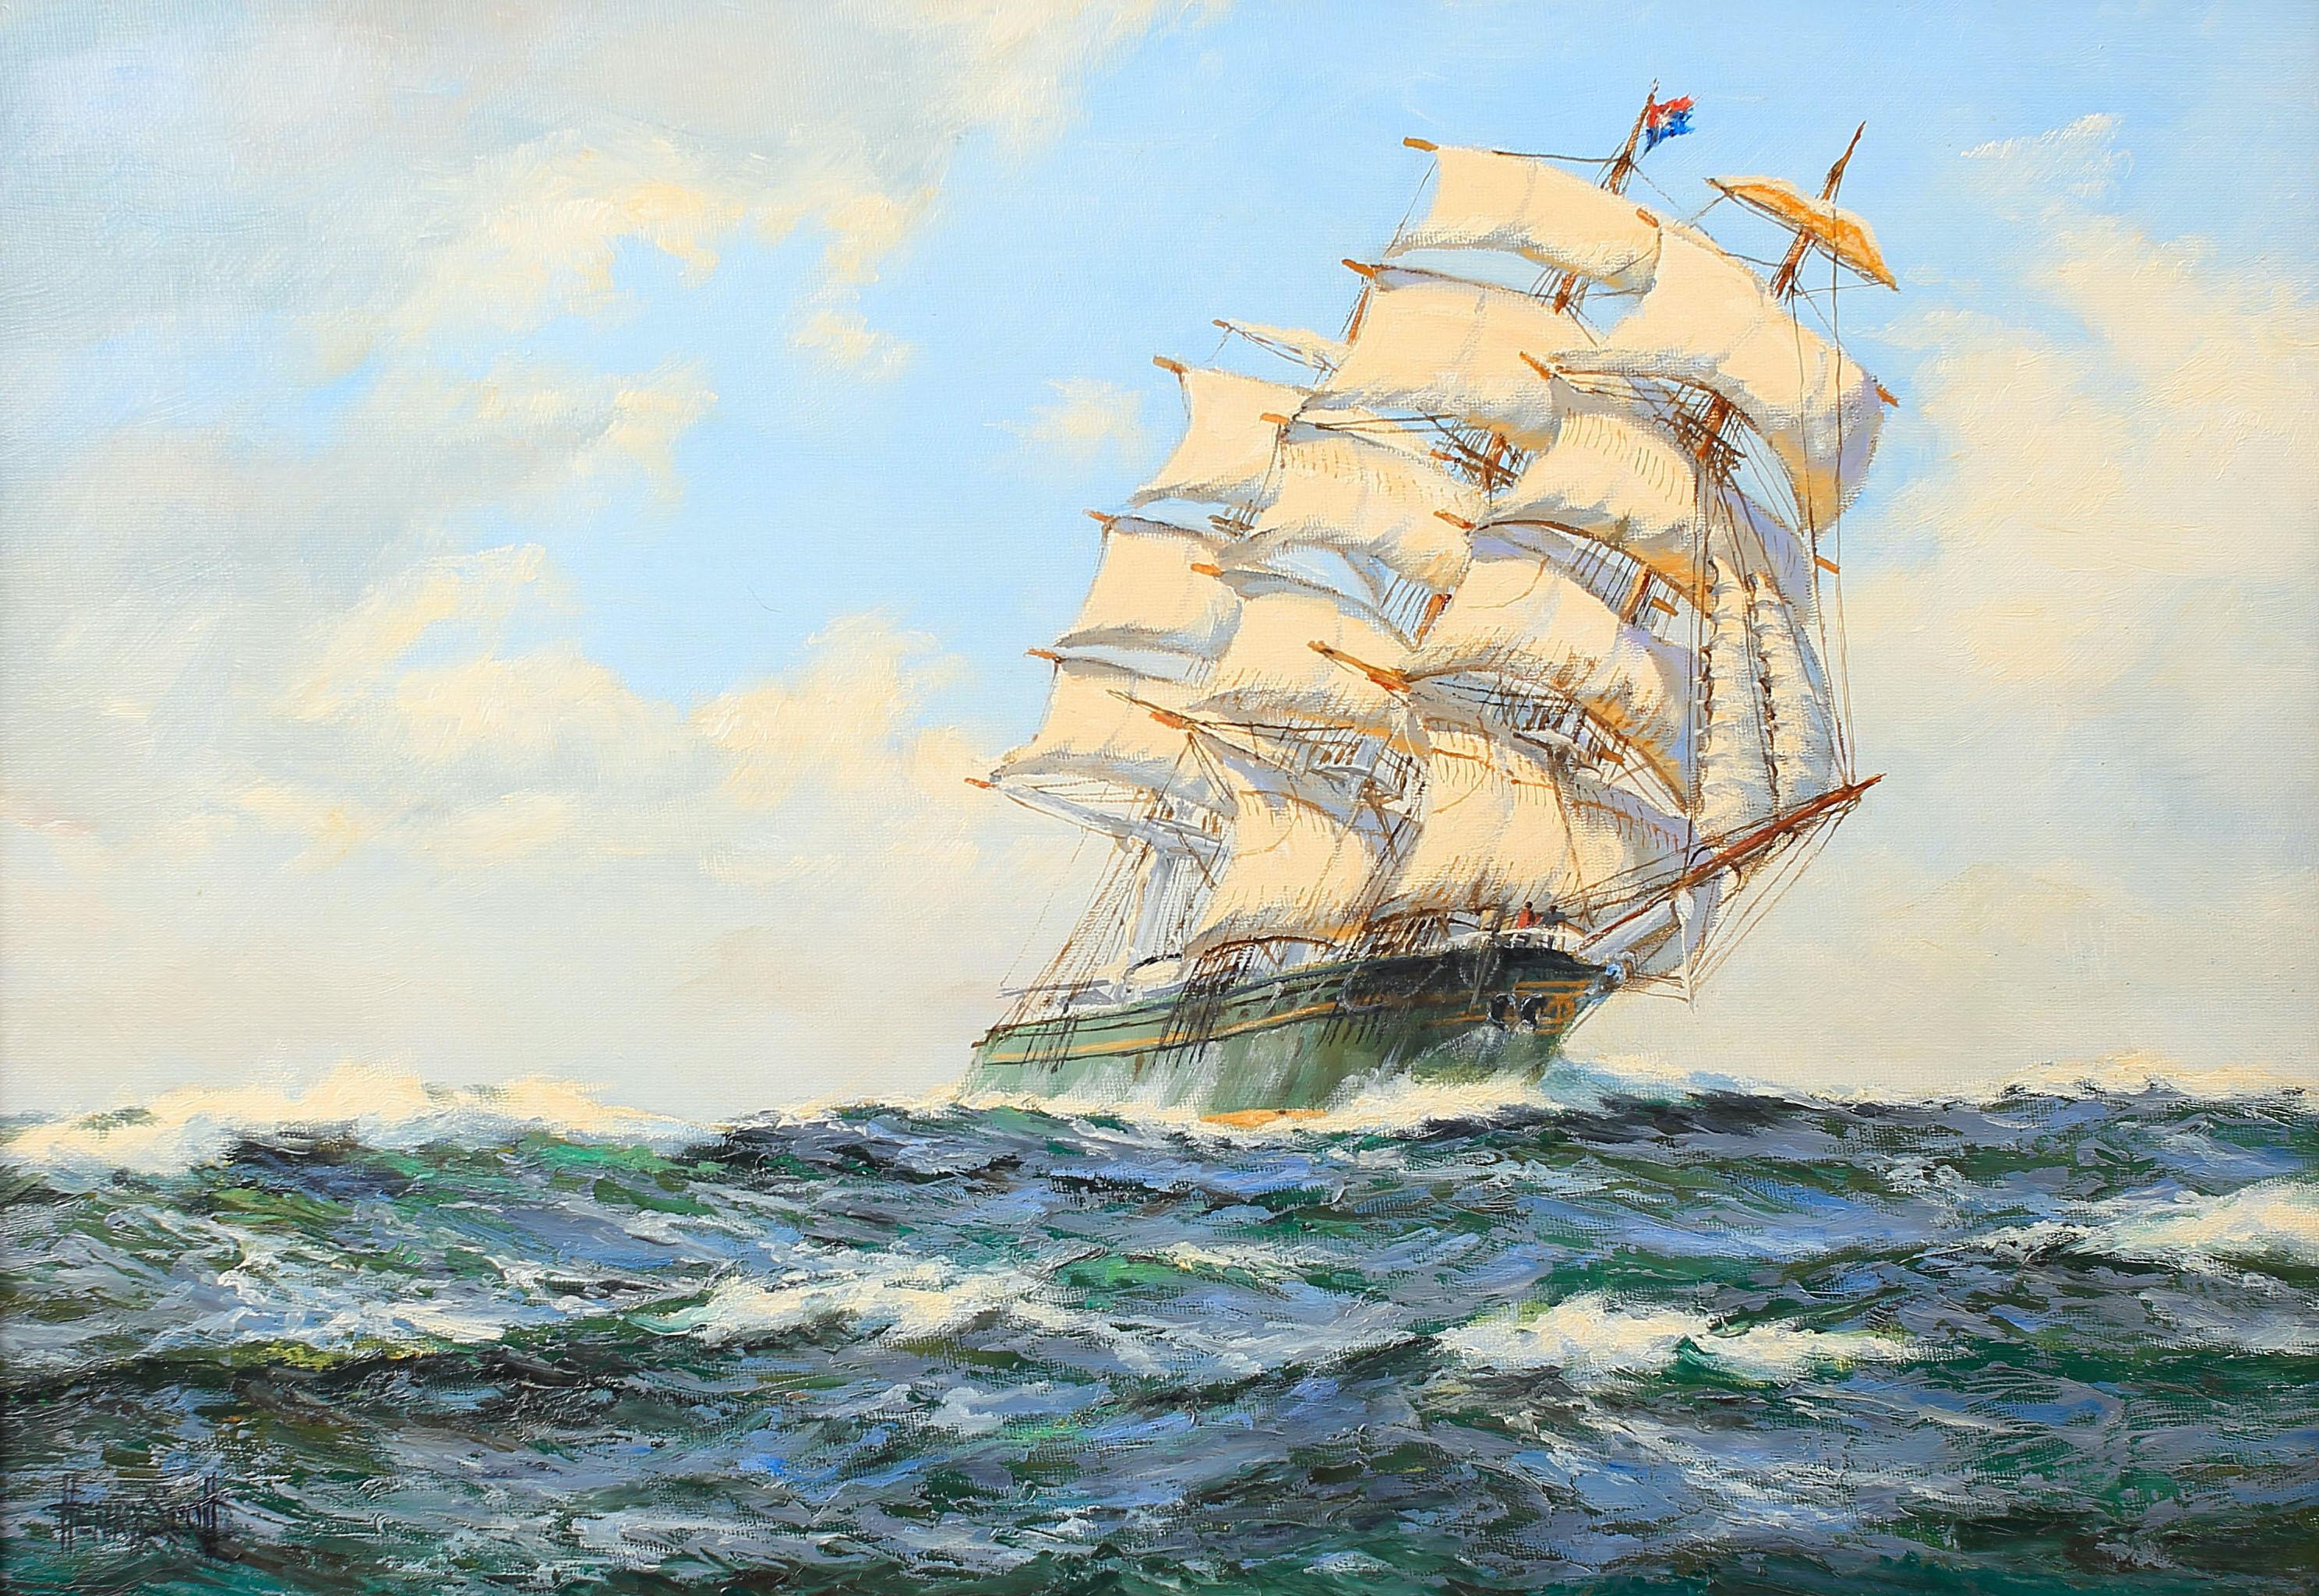 Open Water - Foo Chow to London - Tea Clipper 'Thermopylae' - Painting by Henry Scott